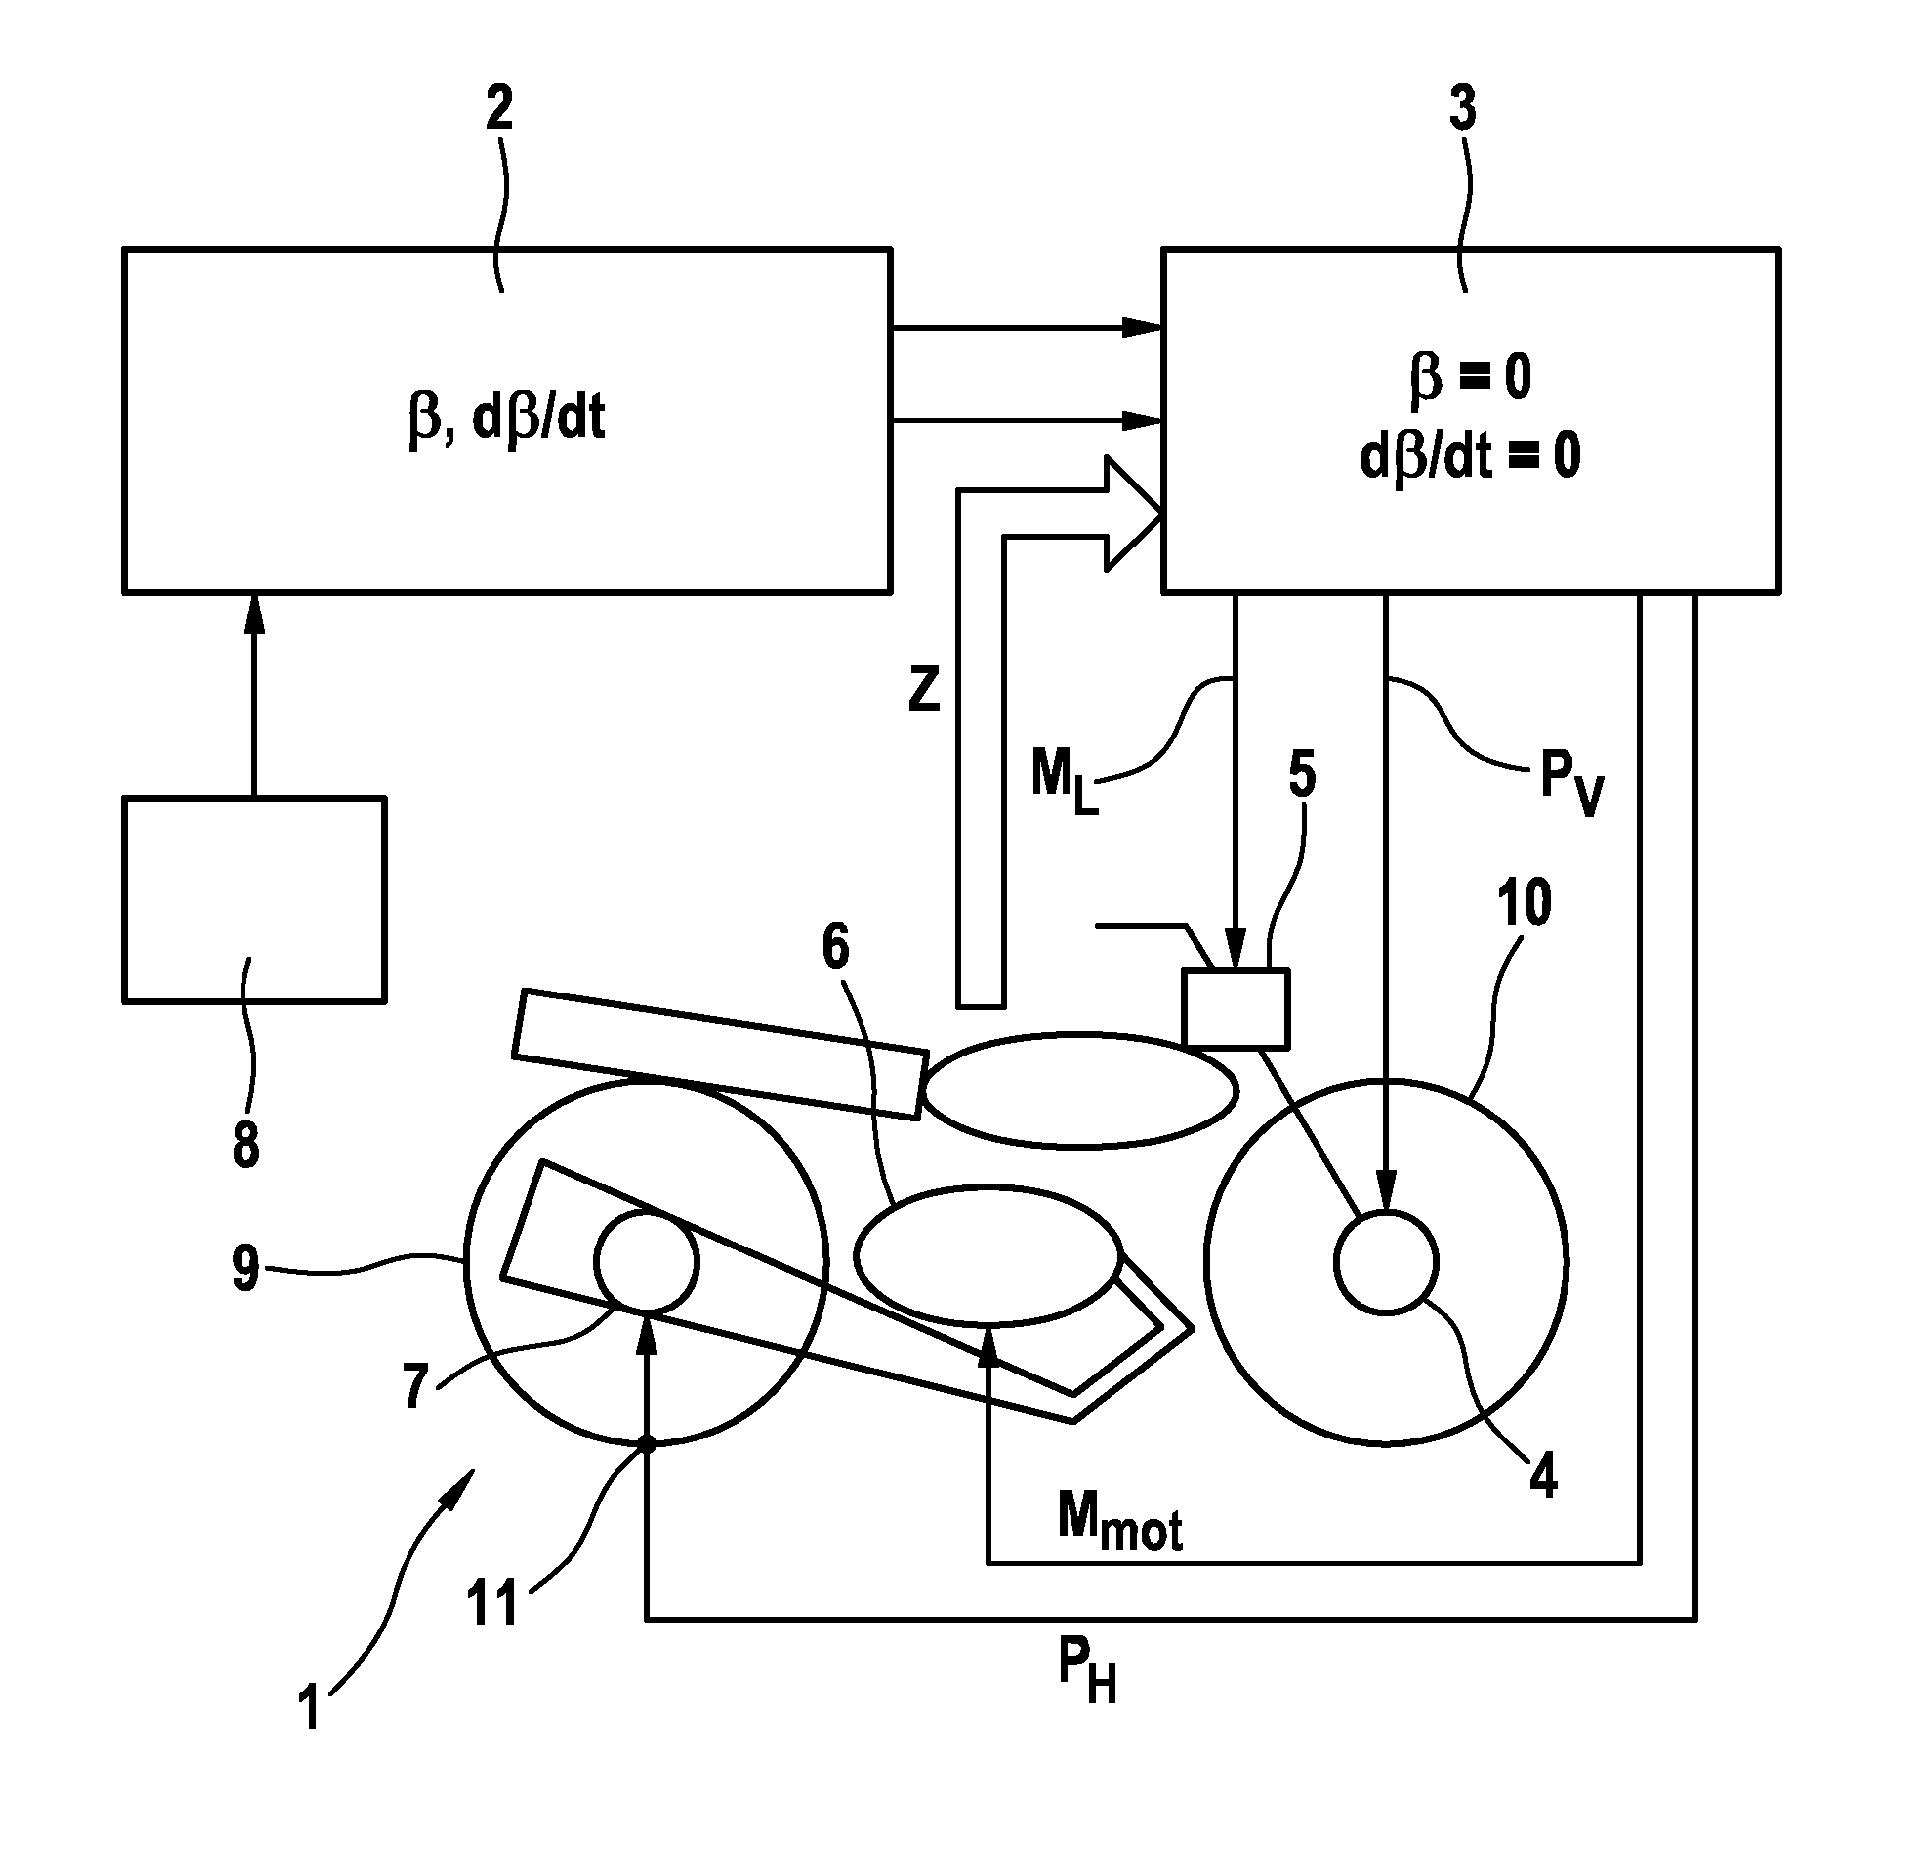 Method for stabilizing a two-wheeled vehicle having a laterally slipping rear wheel